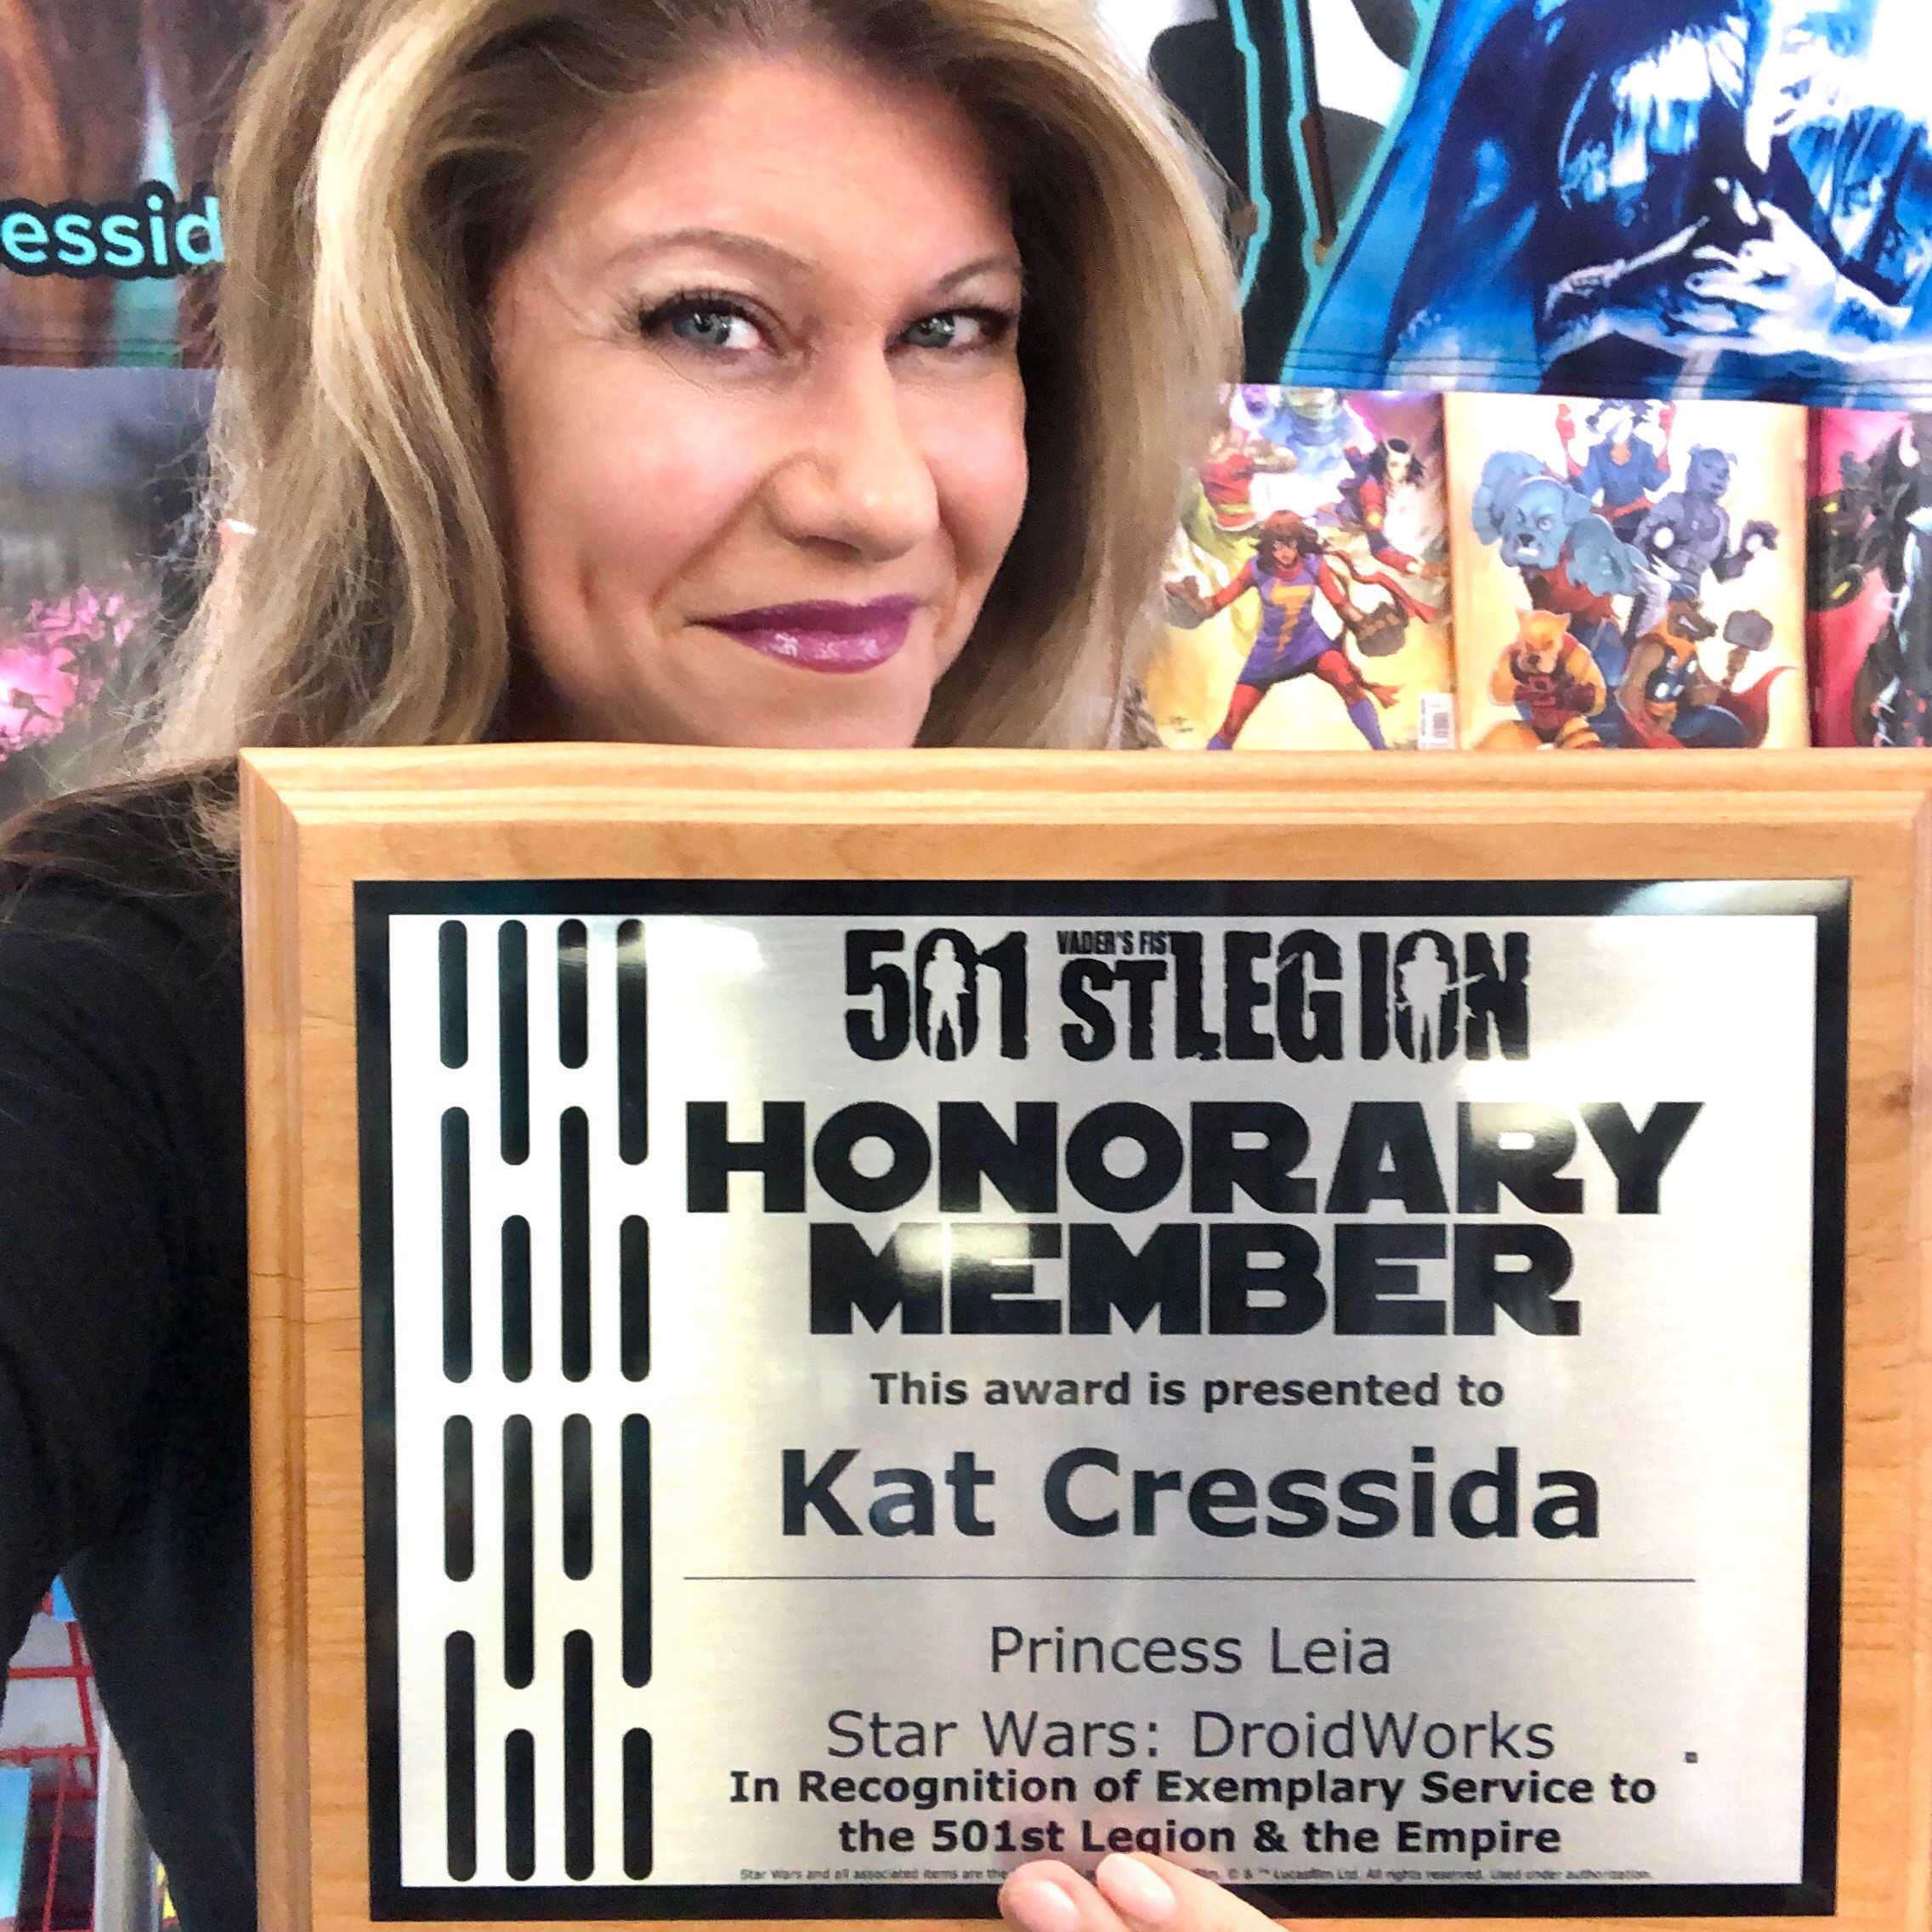 Kat Cressida is made an honorary member of the #501st Legion at Star Wars fan convention for voicing Princess Leia